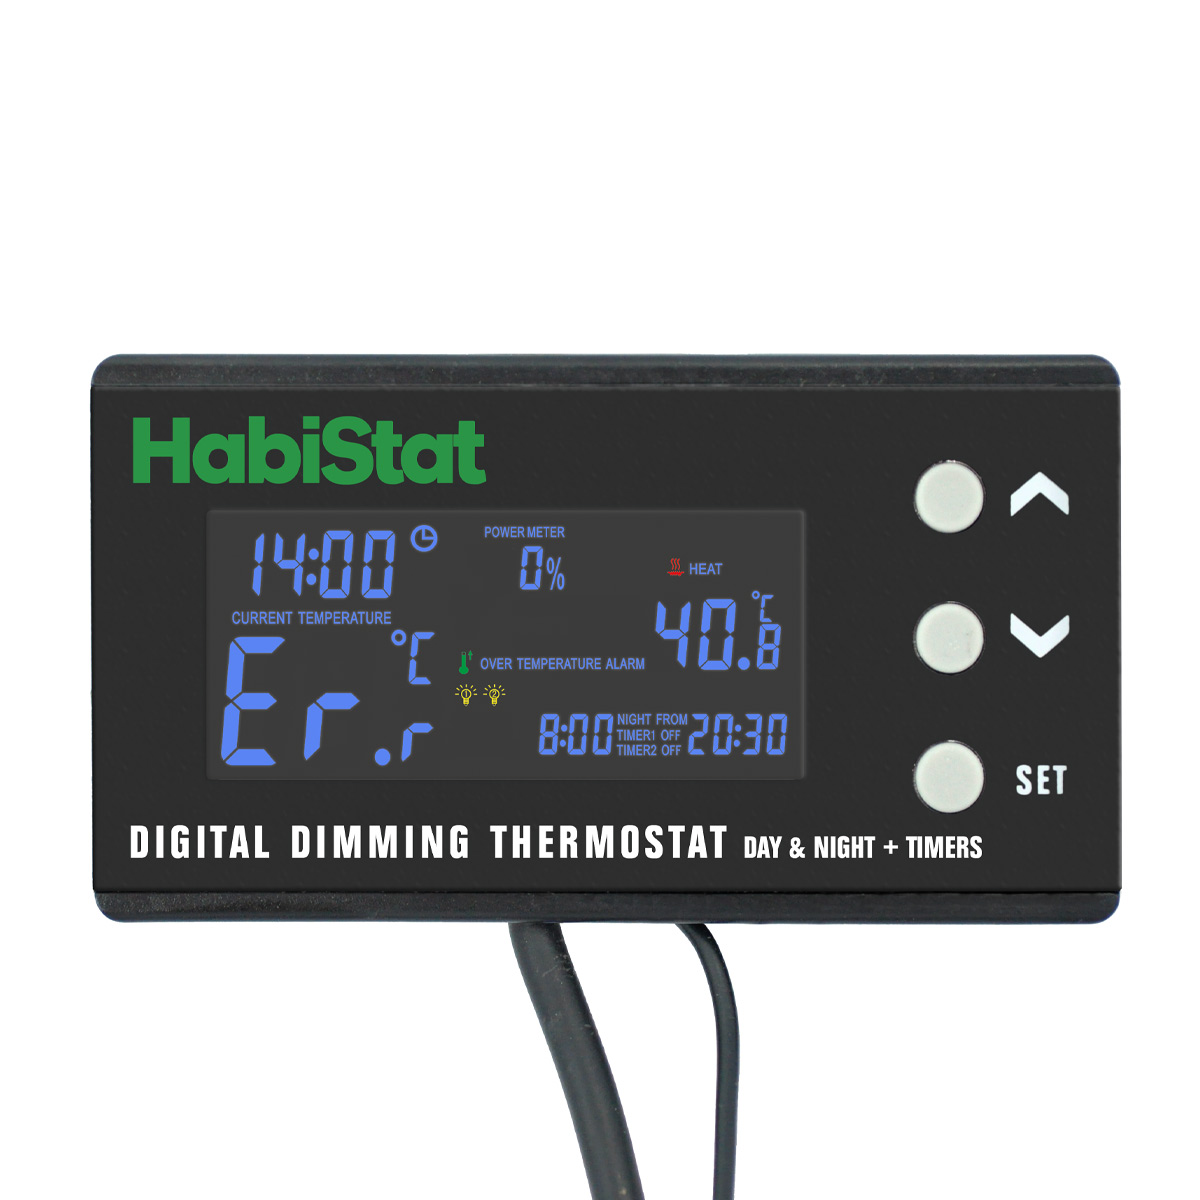 HabiStat Digital Dimmer Thermostat with Err Code